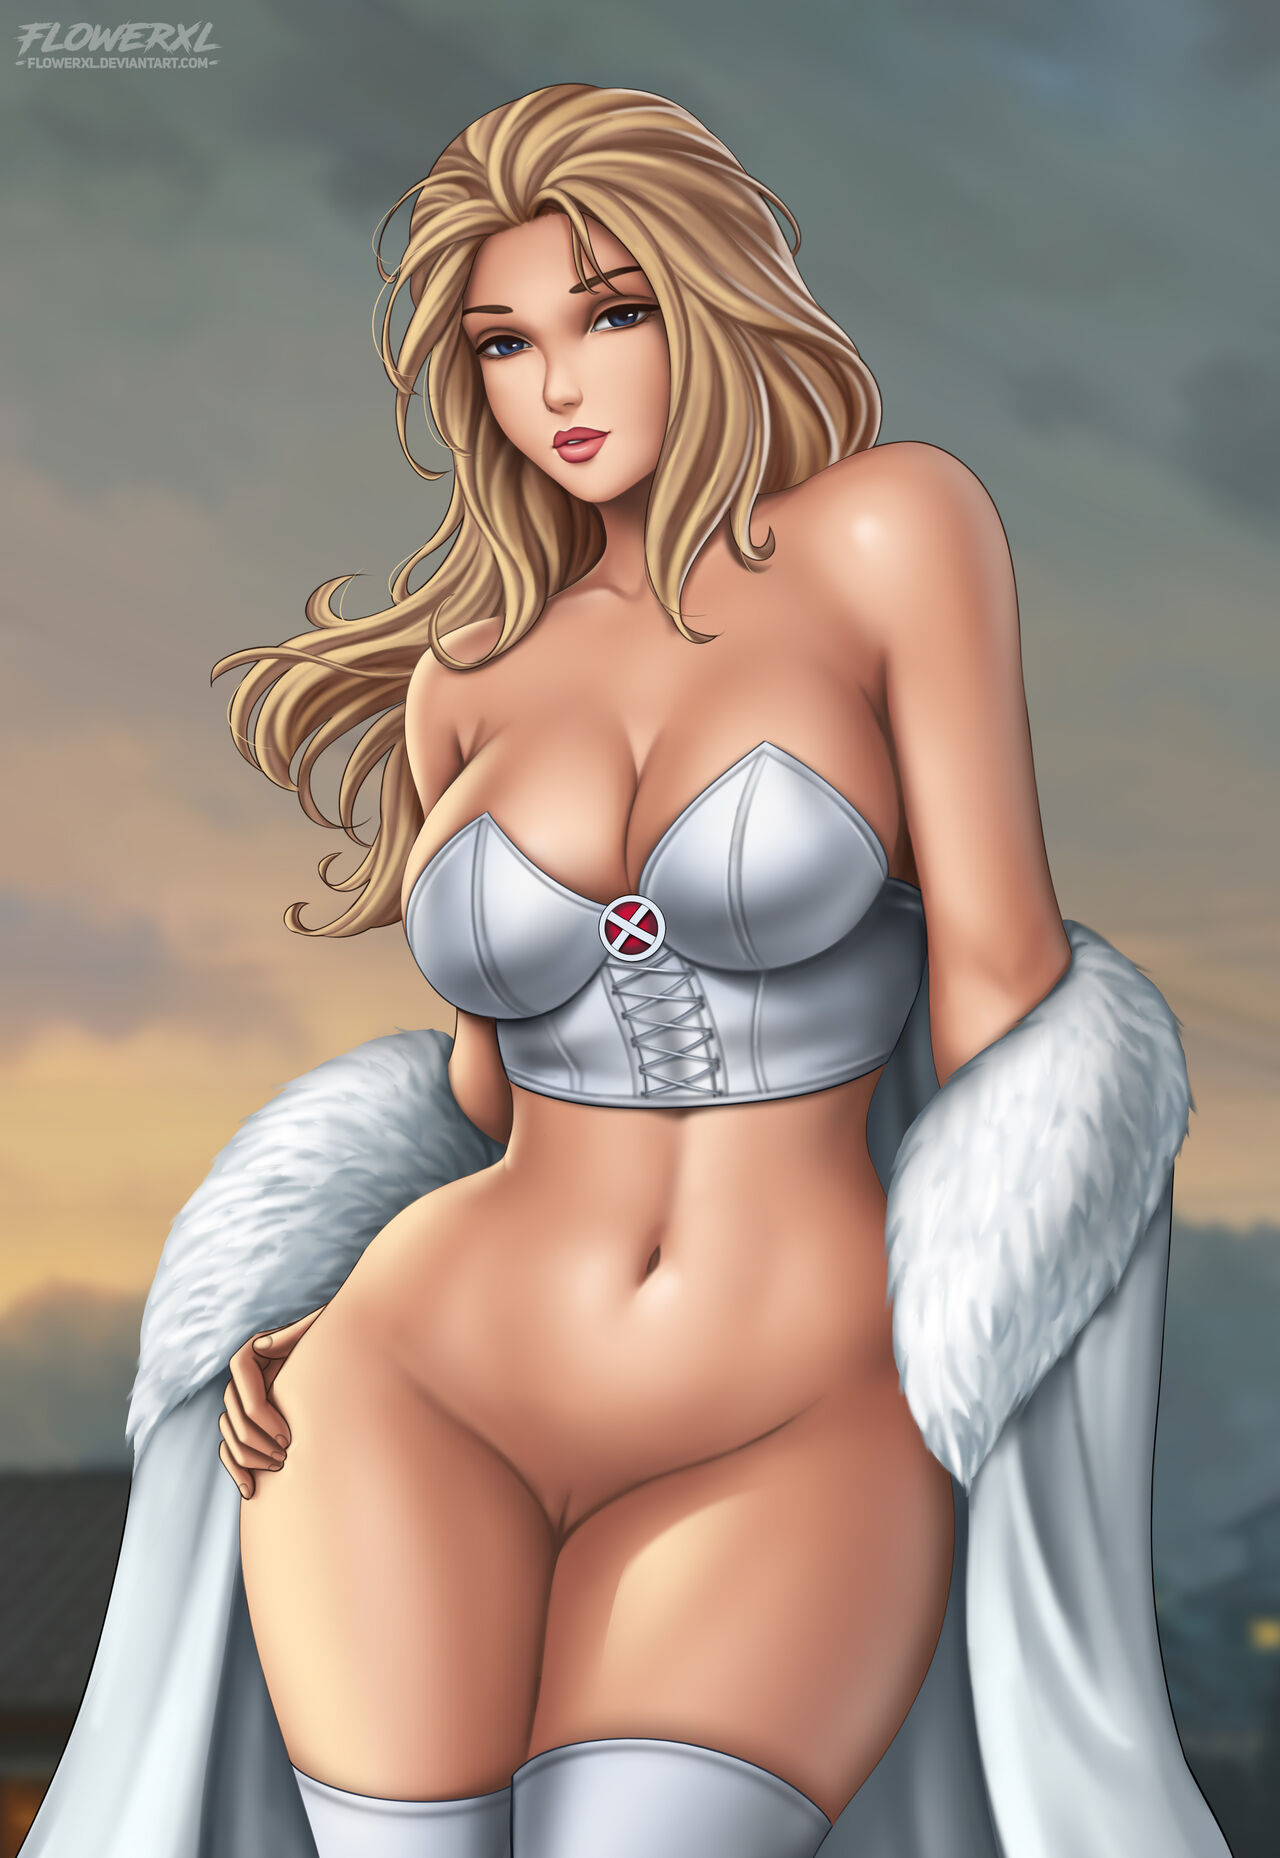 1girl 1girl alternate_version_available artist_logo big_breasts big_breasts black_eyebrows blonde_female blonde_hair blue_eyes breasts coat comic_book_character detailed_background emma_frost female_only flowerxl girls hand_on_thigh long_hair marvel marvel_comics no_panties pale-skinned_female pussy thighs white_high_heels white_queen white_topwear widescreen x-men